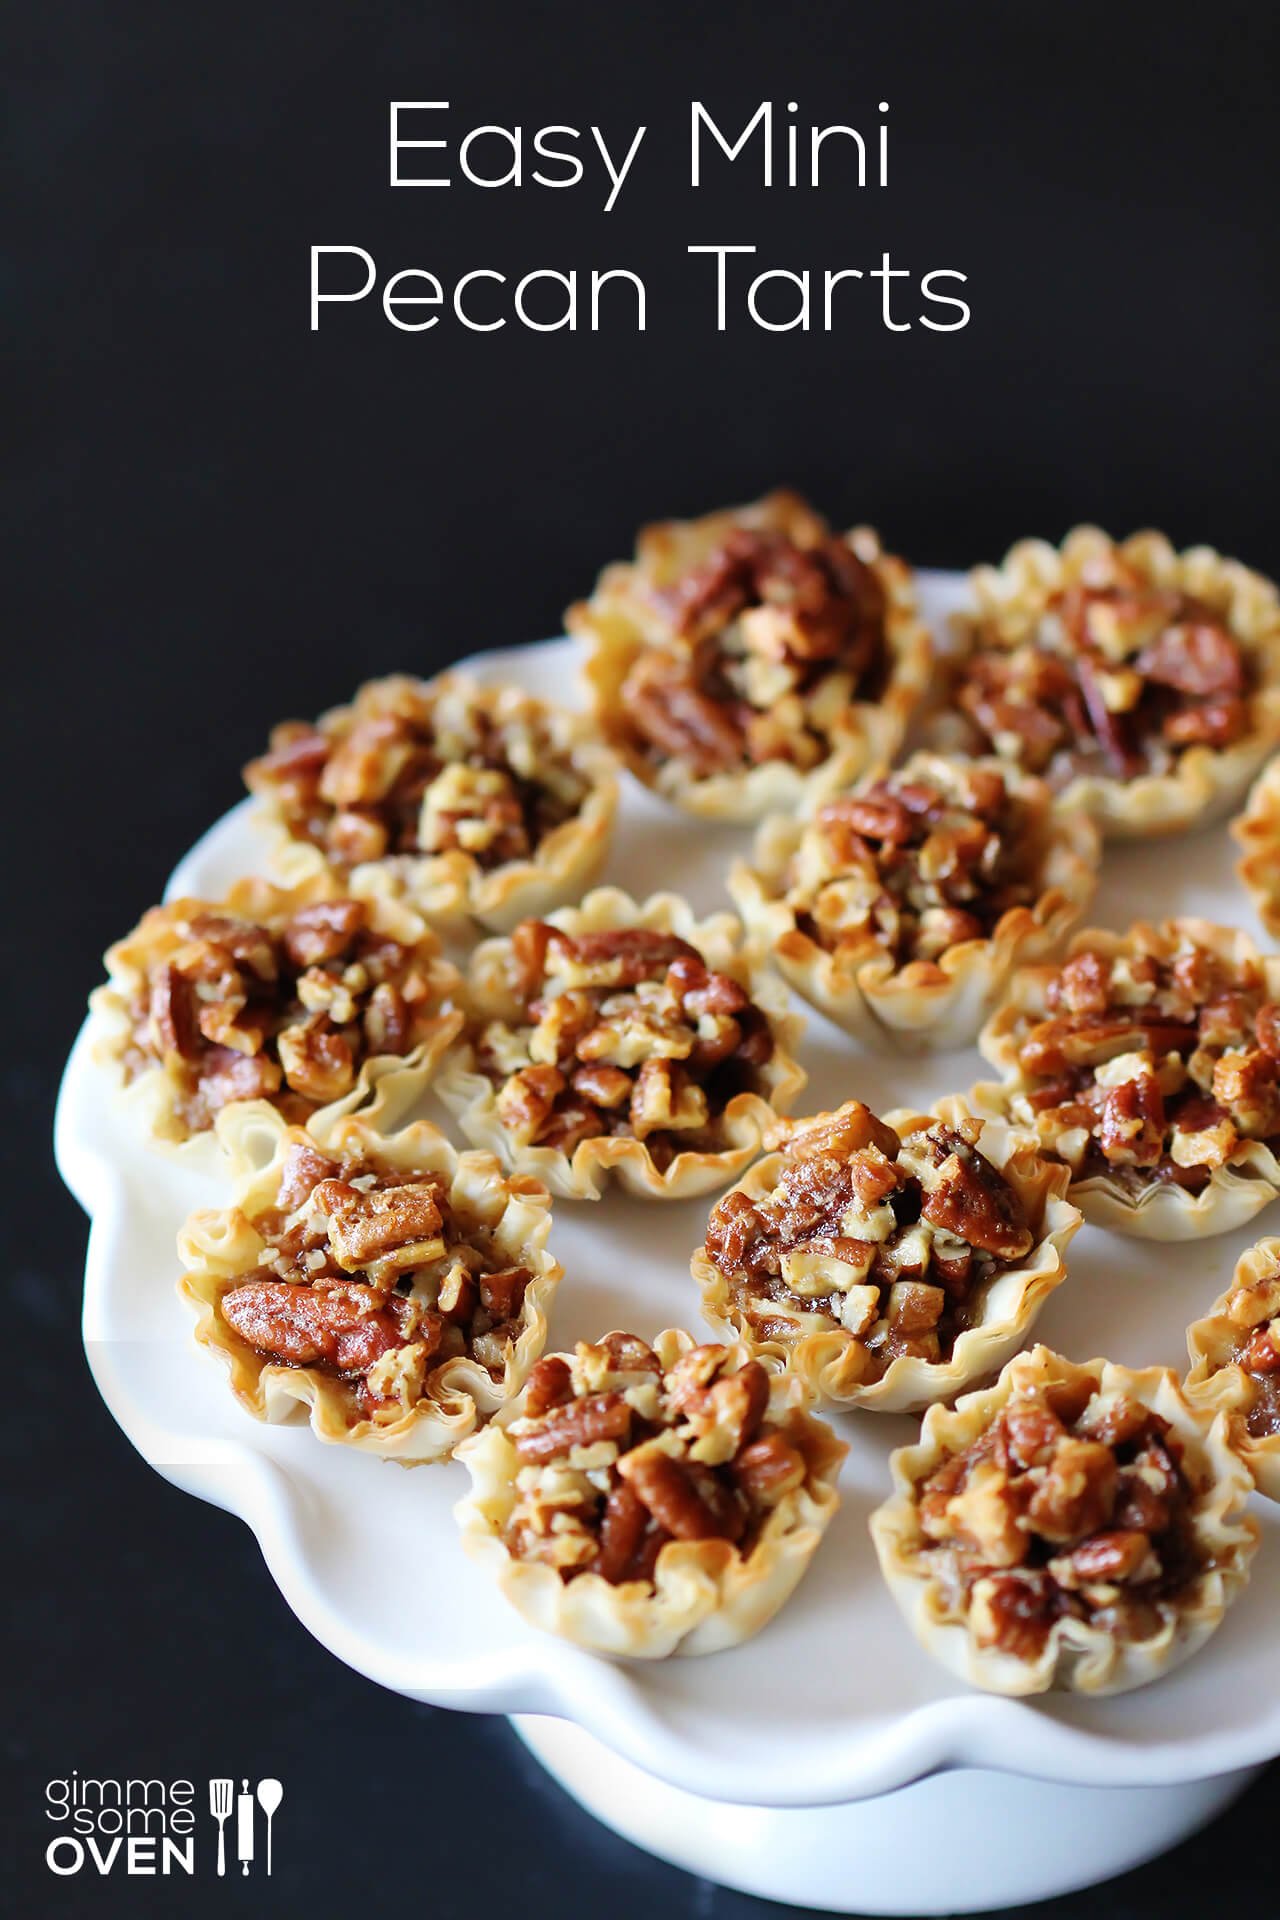 What is a recipe for miniature pecan tarts?